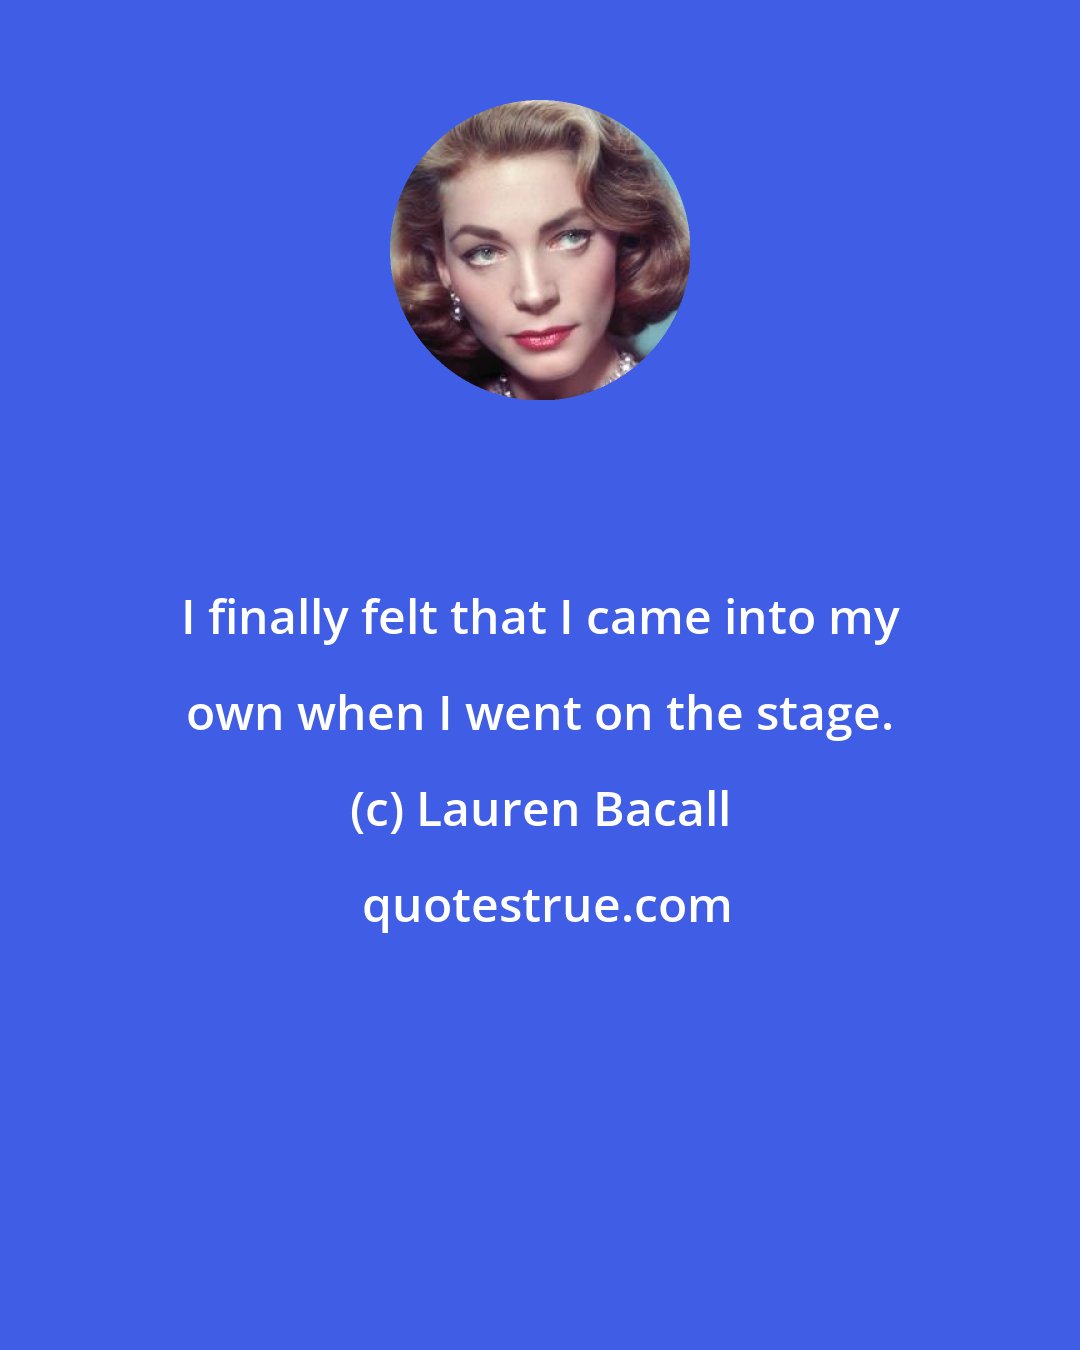 Lauren Bacall: I finally felt that I came into my own when I went on the stage.